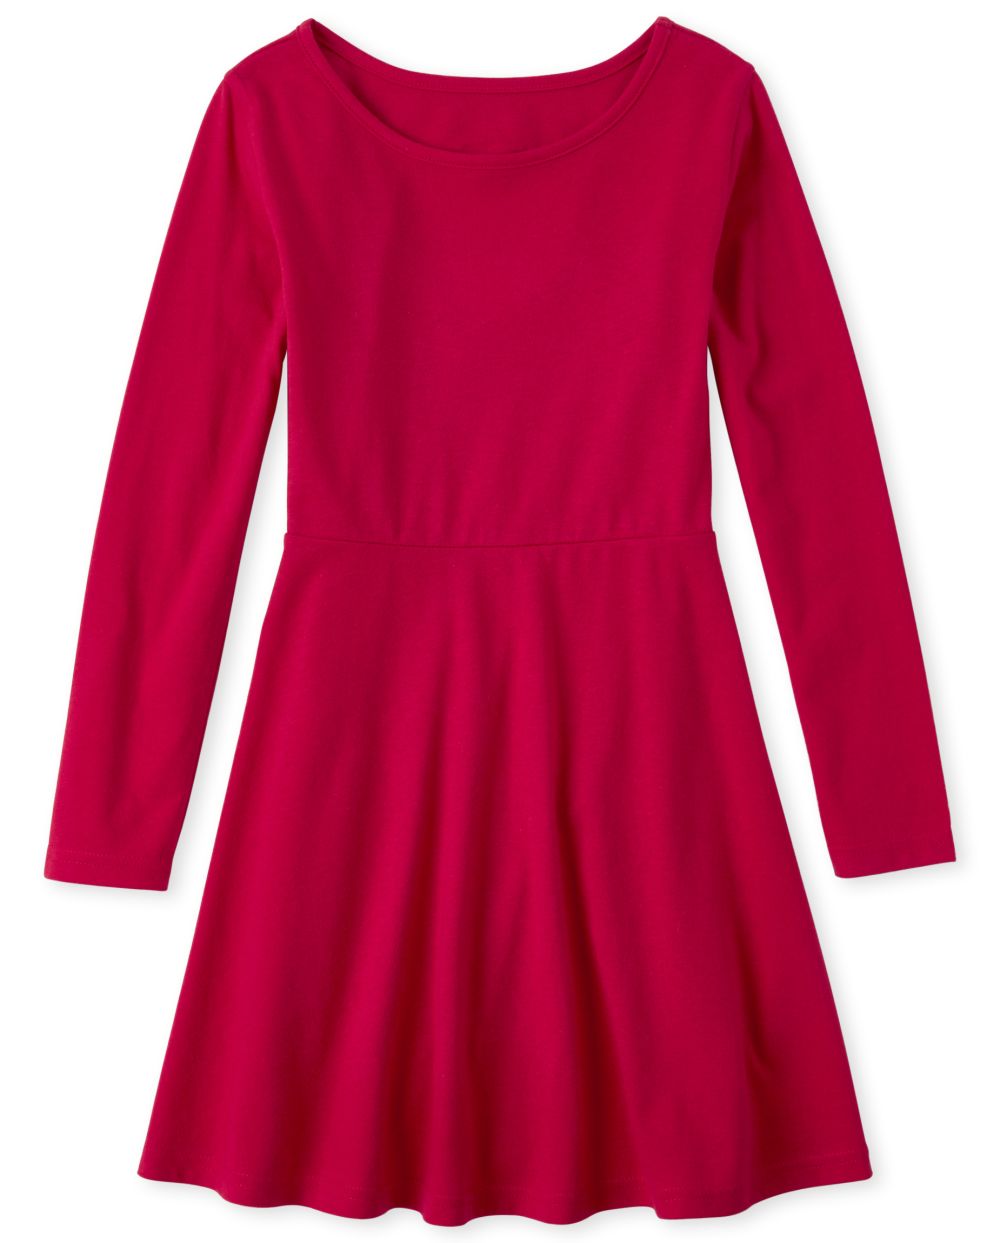 Girls Valentine's Day Long Sleeve Heart Cut Out Matching Knit Skater Dress